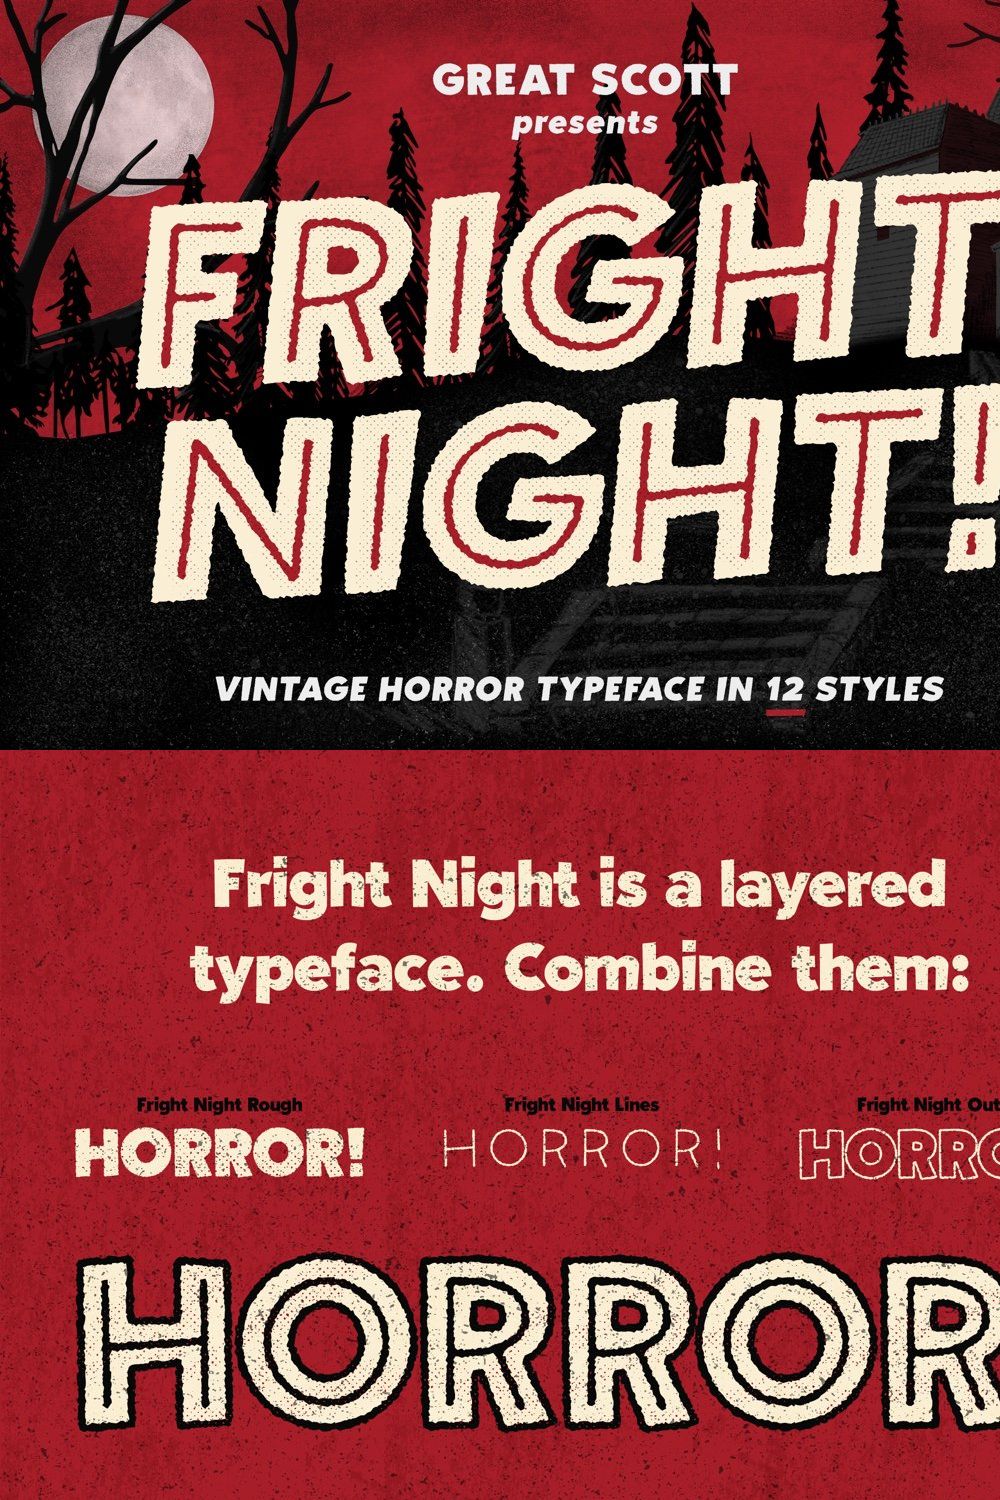 Fright Night! A vintage horror font pinterest preview image.